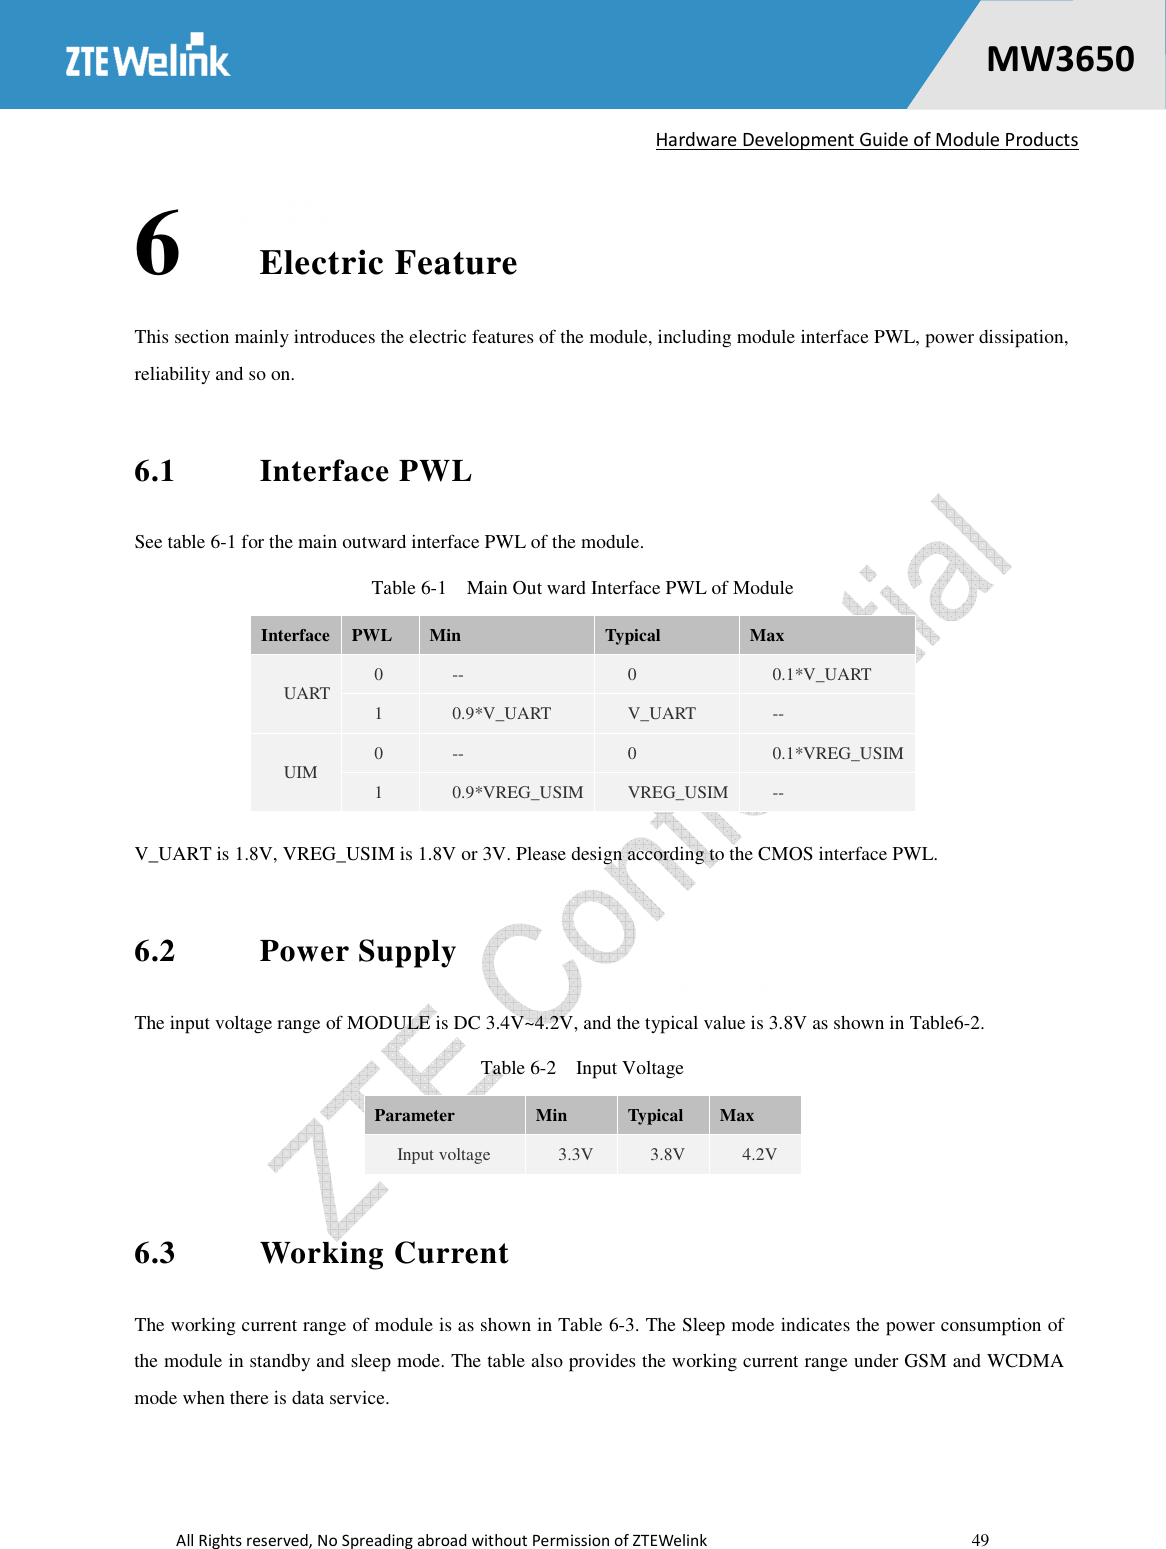   Hardware Development Guide of Module Products  All Rights reserved, No Spreading abroad without Permission of ZTEWelink    49    MW36500 6 Electric Feature This section mainly introduces the electric features of the module, including module interface PWL, power dissipation, reliability and so on. 6.1  Interface PWL See table 6-1 for the main outward interface PWL of the module. Table 6-1    Main Out ward Interface PWL of Module Interface  PWL  Min    Typical  Max UART  0  --  0  0.1*V_UART 1  0.9*V_UART  V_UART  -- UIM  0  --  0  0.1*VREG_USIM 1  0.9*VREG_USIM  VREG_USIM  -- V_UART is 1.8V, VREG_USIM is 1.8V or 3V. Please design according to the CMOS interface PWL. 6.2  Power Supply The input voltage range of MODULE is DC 3.4V~4.2V, and the typical value is 3.8V as shown in Table6-2. Table 6-2    Input Voltage Parameter  Min  Typical  Max Input voltage    3.3V  3.8V  4.2V 6.3  Working Current The working current range of module is as shown in Table 6-3. The Sleep mode indicates the power consumption of the module in standby and sleep mode. The table also provides the working current range under GSM and WCDMA mode when there is data service.   